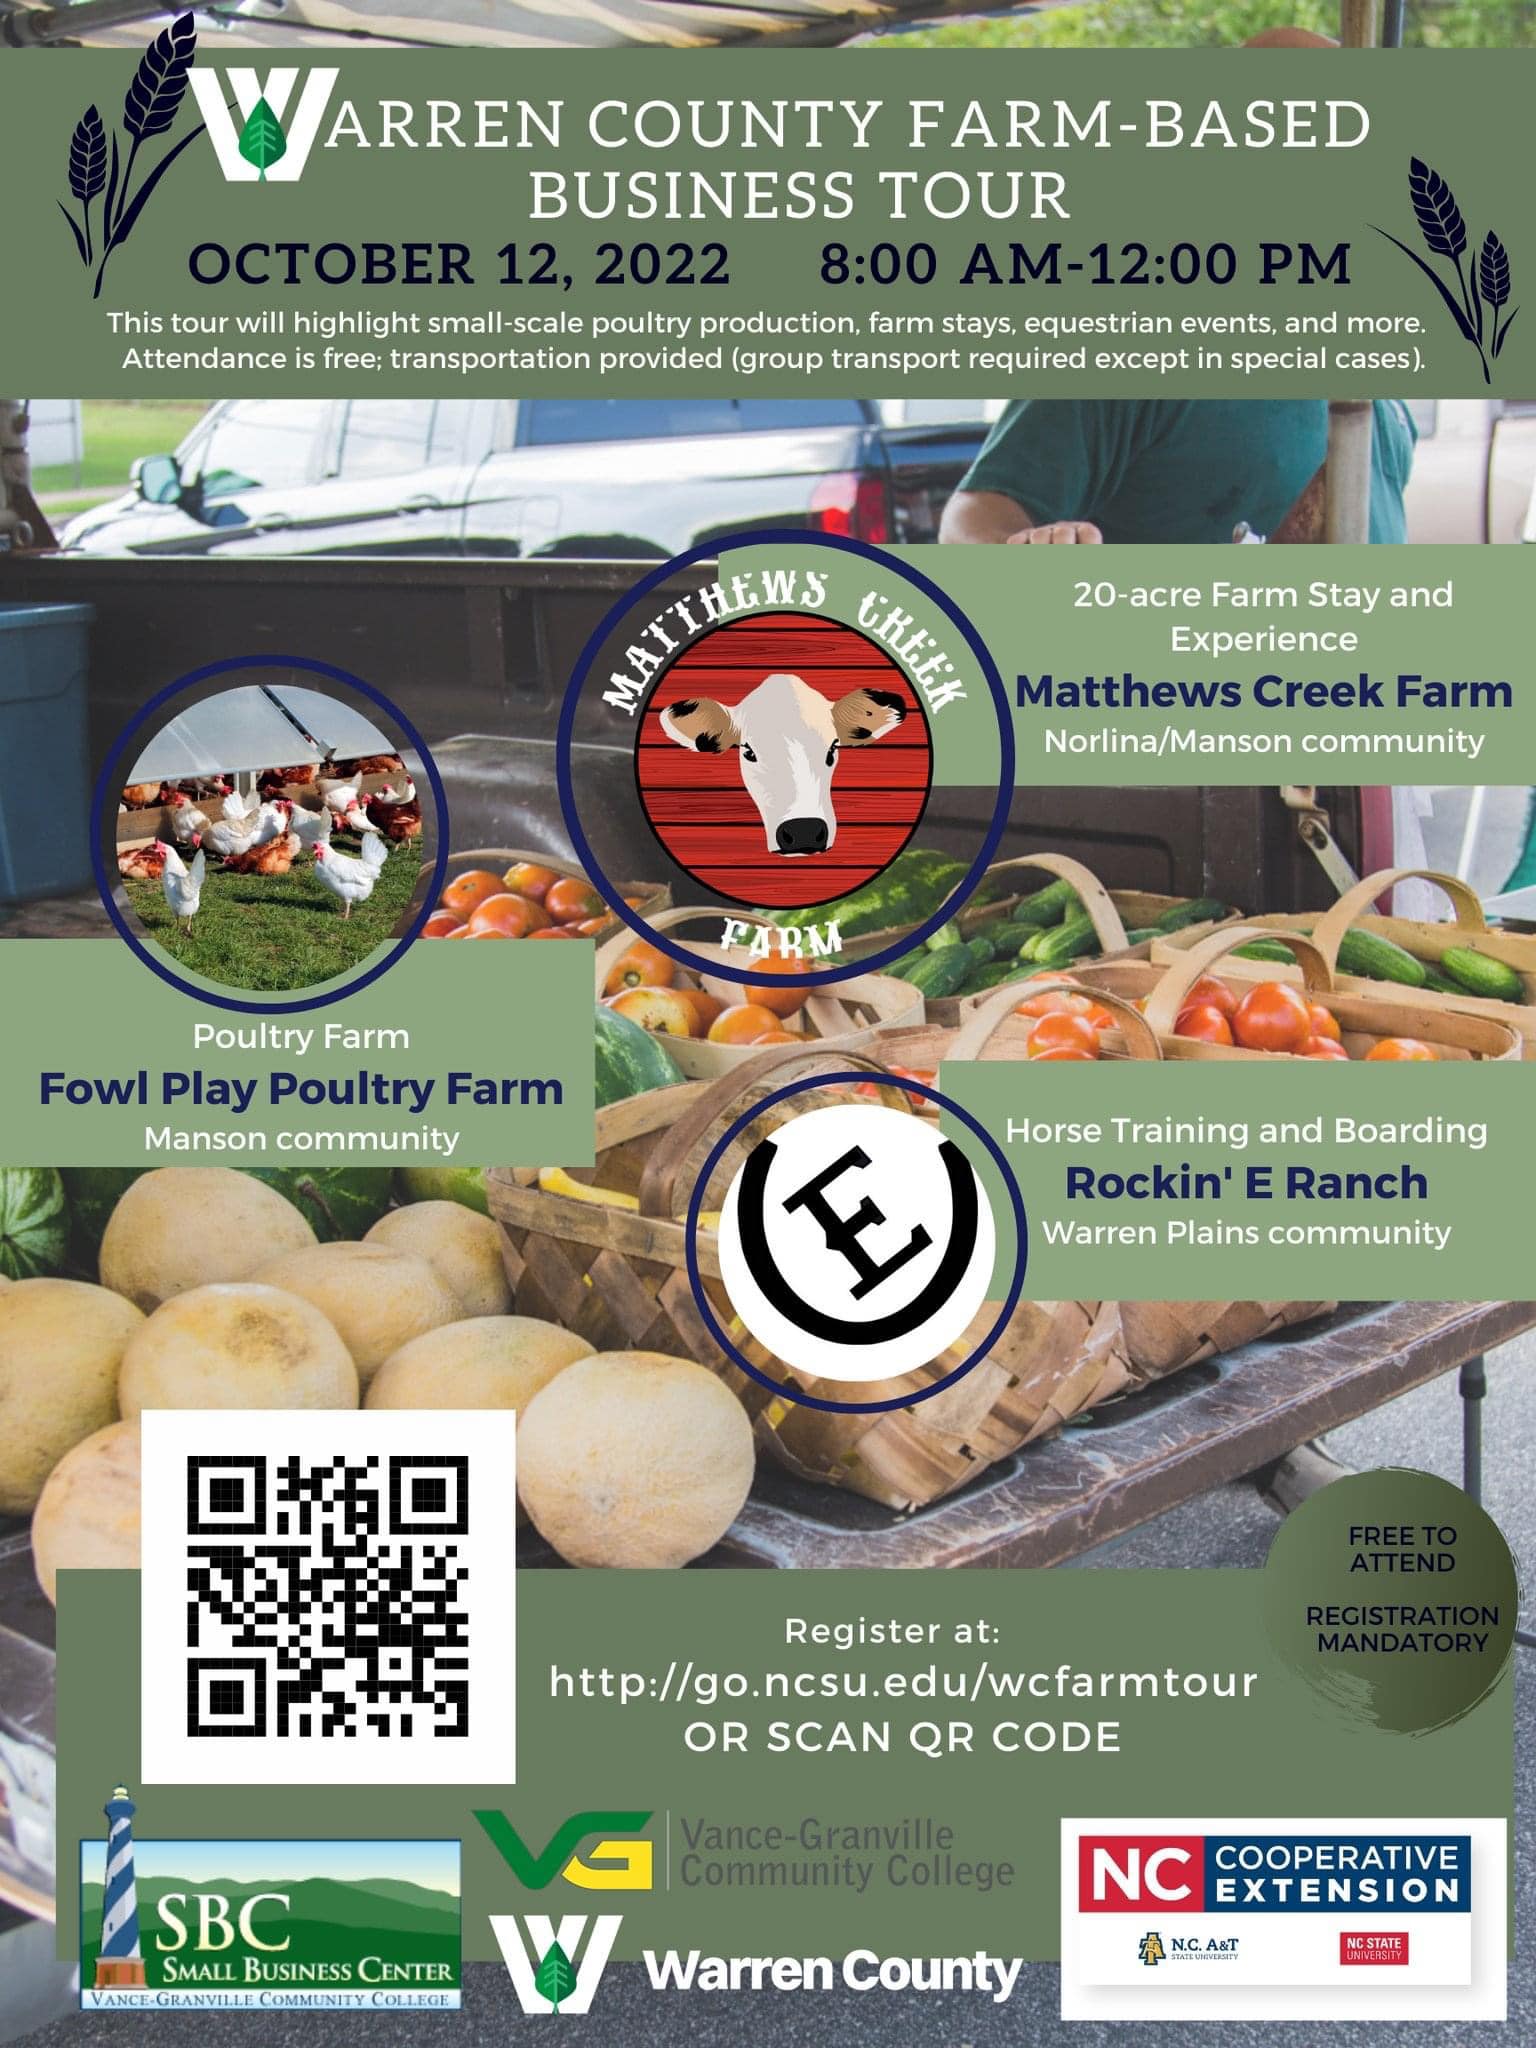 warren county farm based business tour october 12 2022 nc